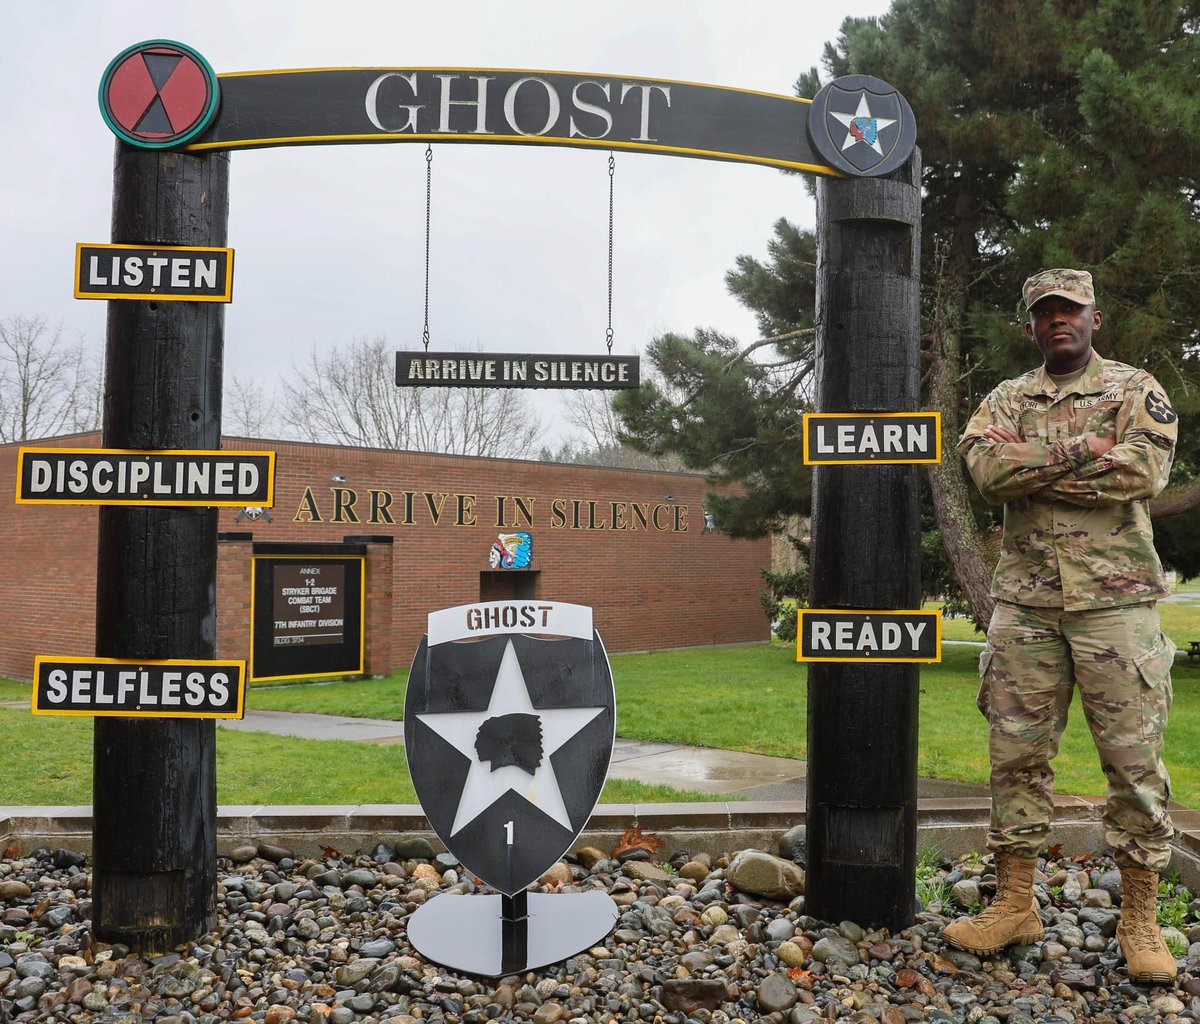 Team, please meet WO1 Ebenezer Oforio, currently serving as a 255A, Data Operations Warrant Officer, with 1-2 SBCT “Ghost”. Originally from Accra, Ghana, Ebenezer moved to the United States in 2013 after registering and being selected through the Diversity Visa Program. #usarmy